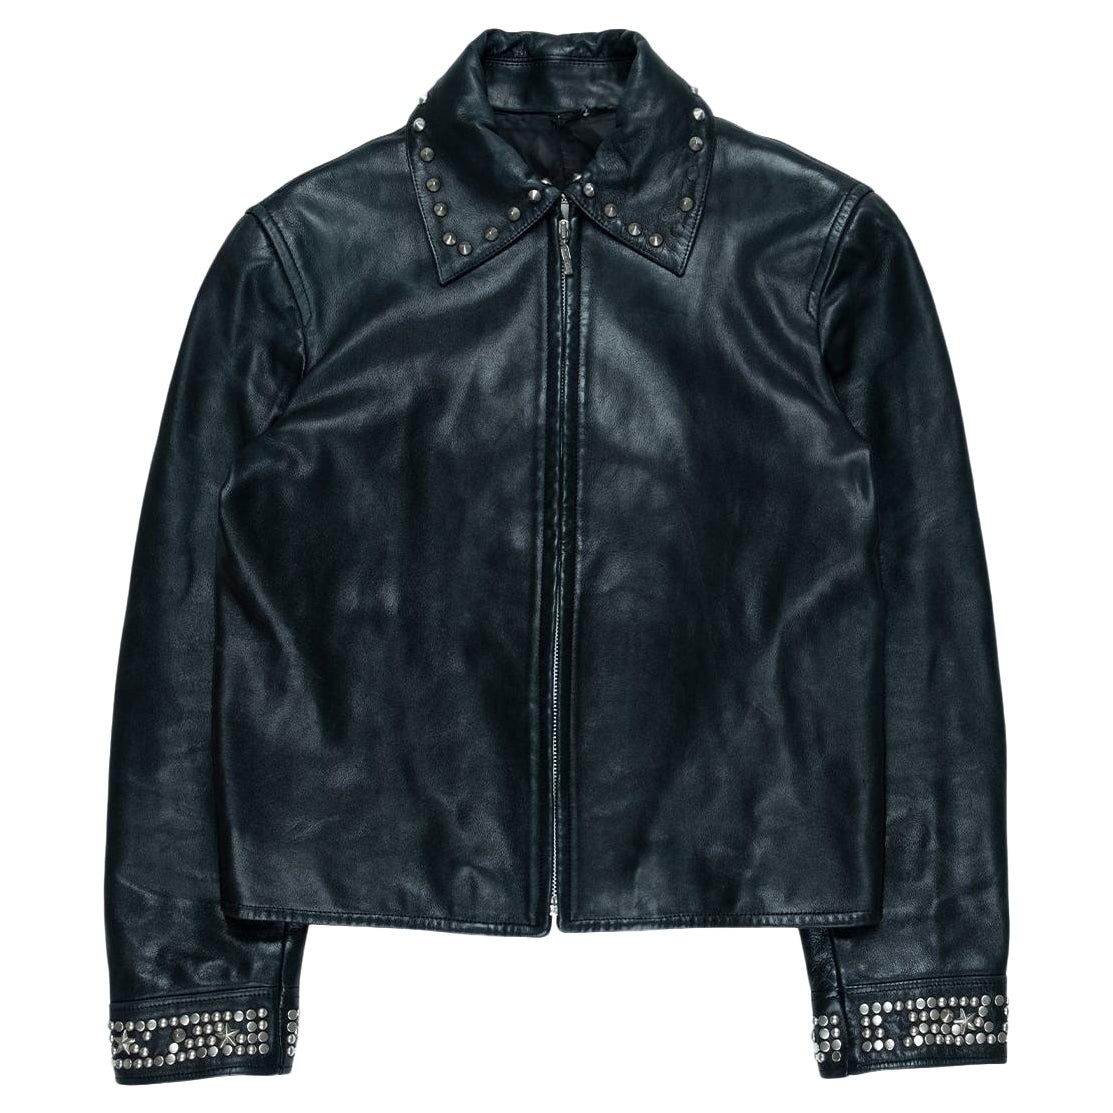 Gianni Versace Studded Leather Jacket For Sale